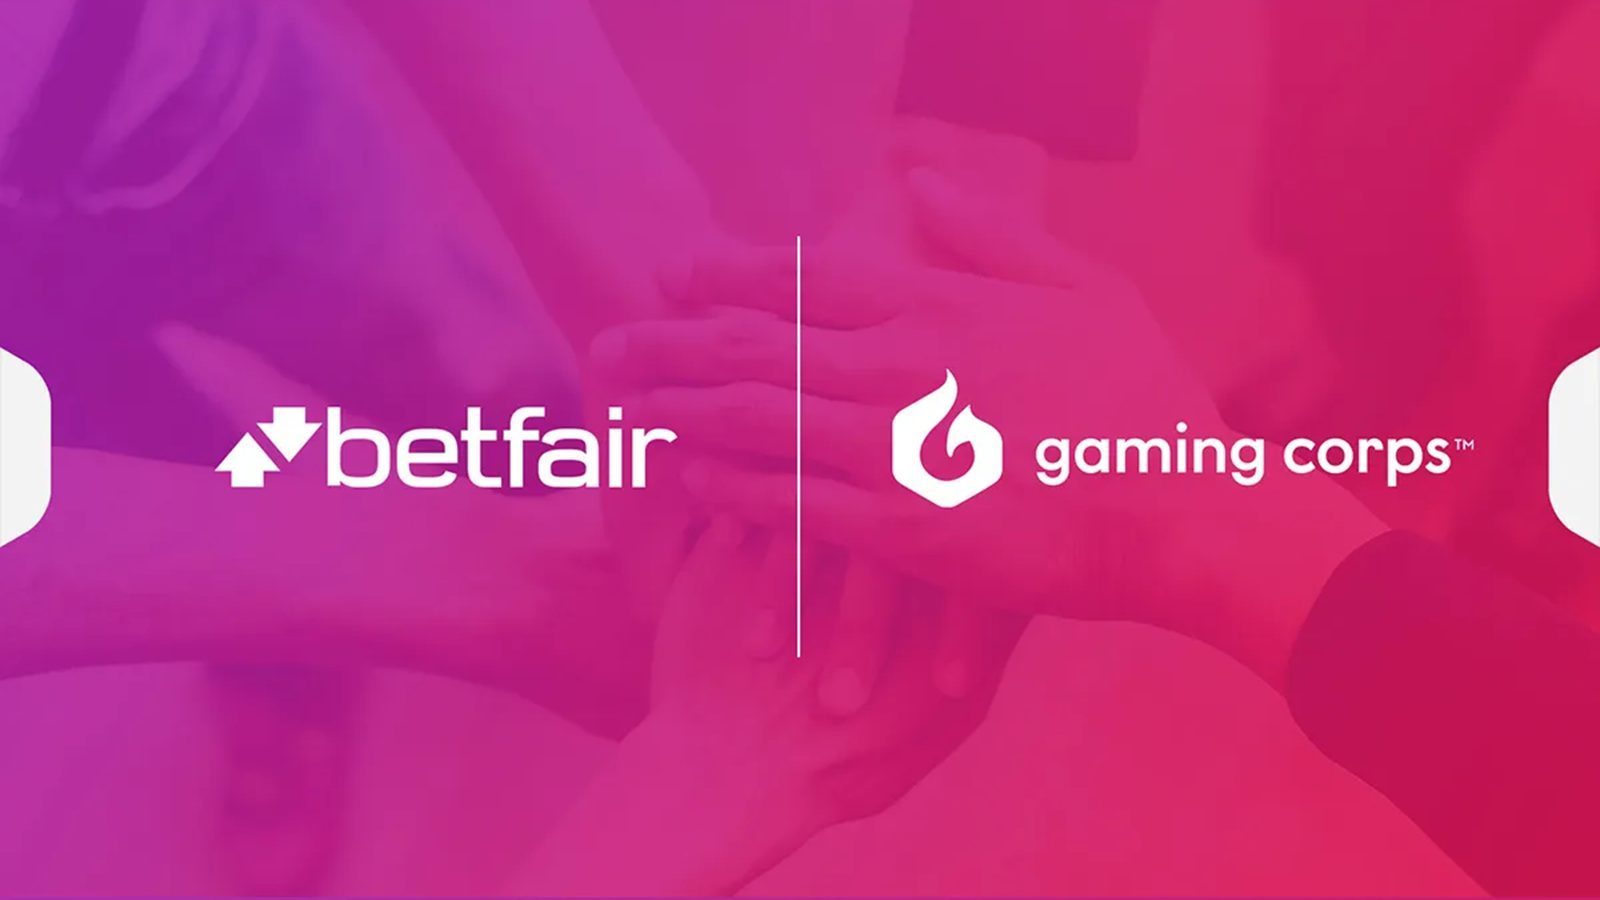 Betfair Casino Joins Forces with Gaming Corps